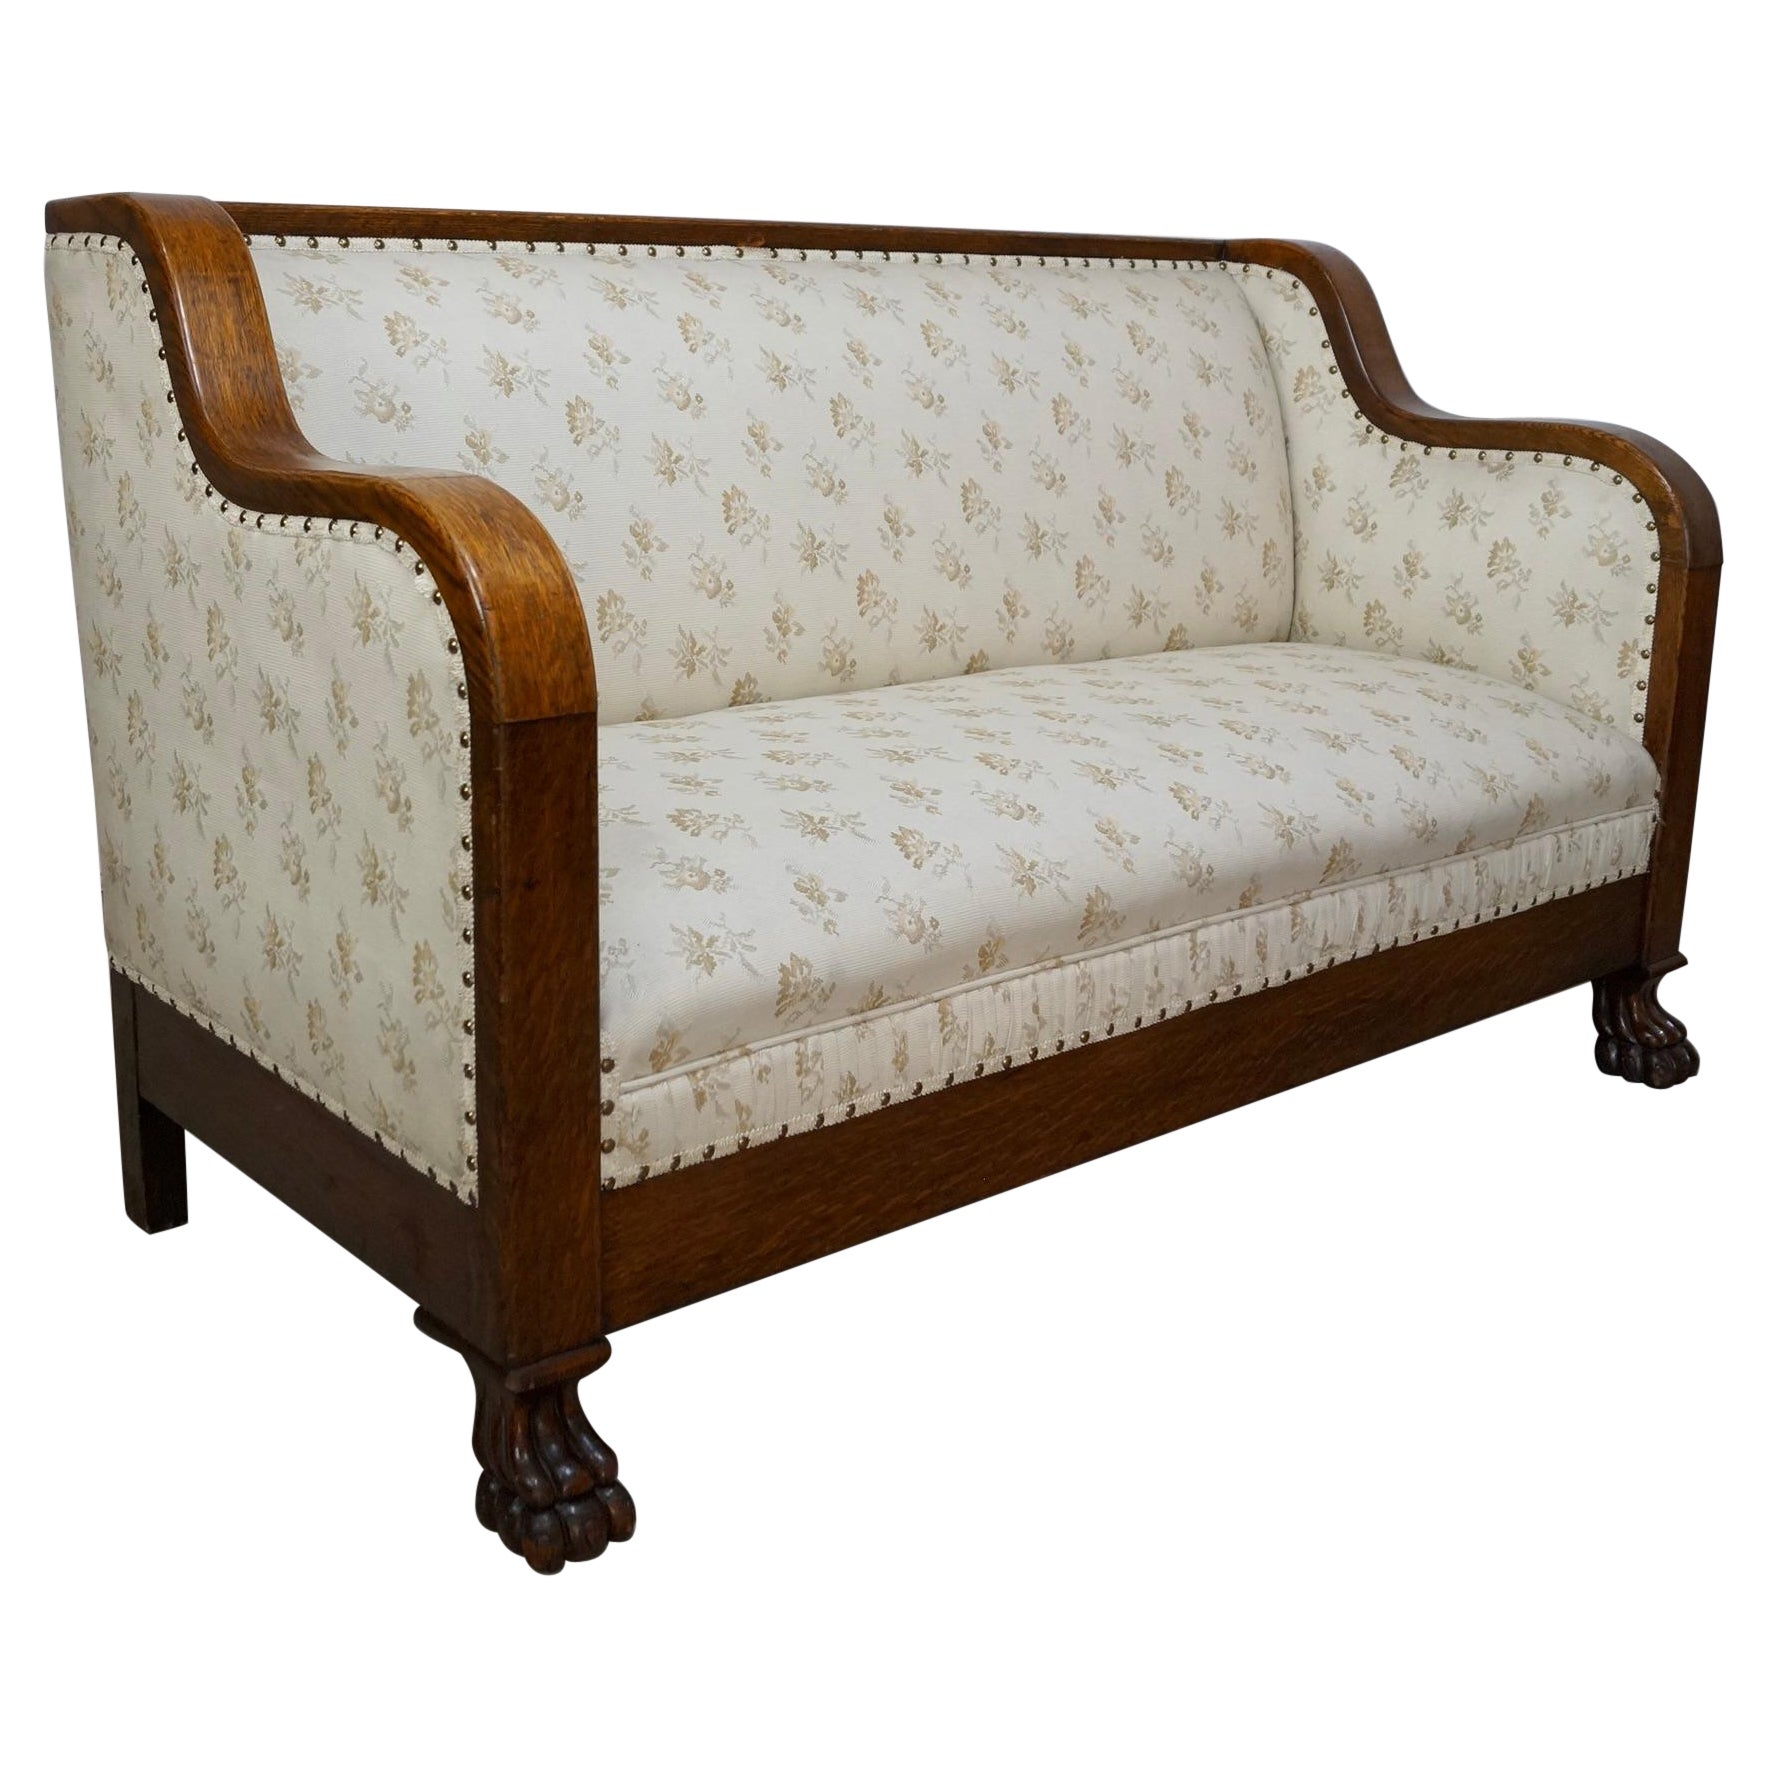 Early 1900's Arts & Crafts Mission Sofa 